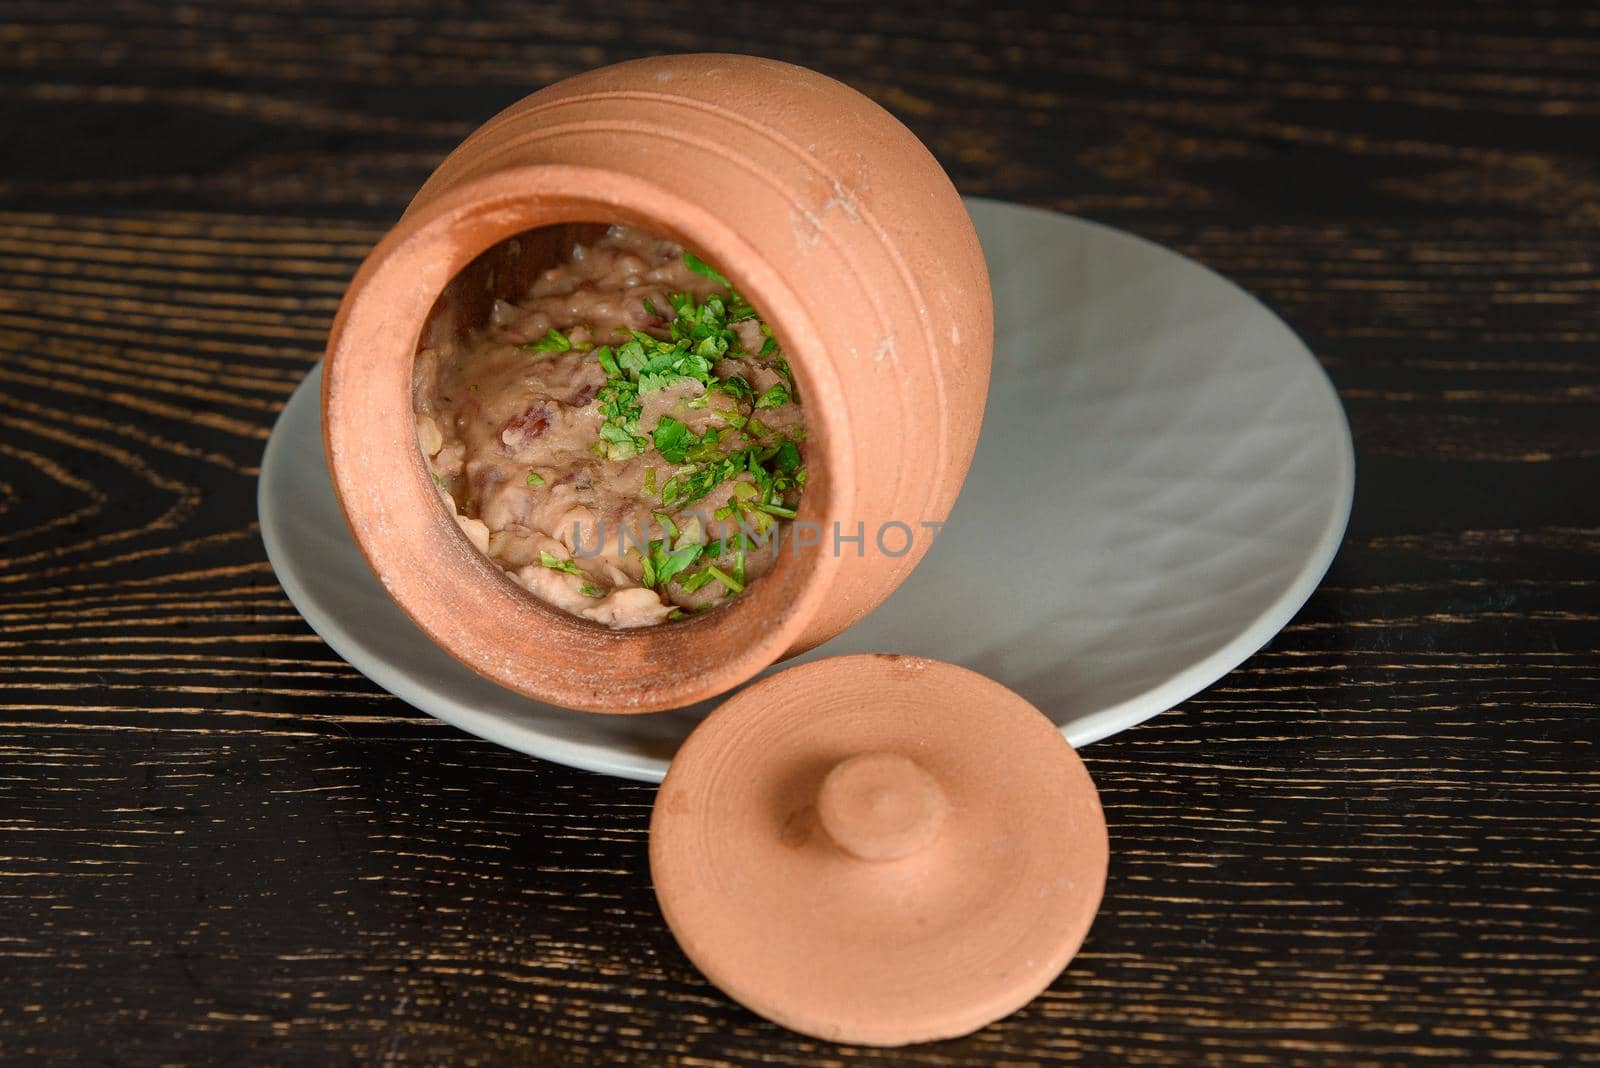 A dish baked in a clay pot decorated with herbs on a dark wooden table.